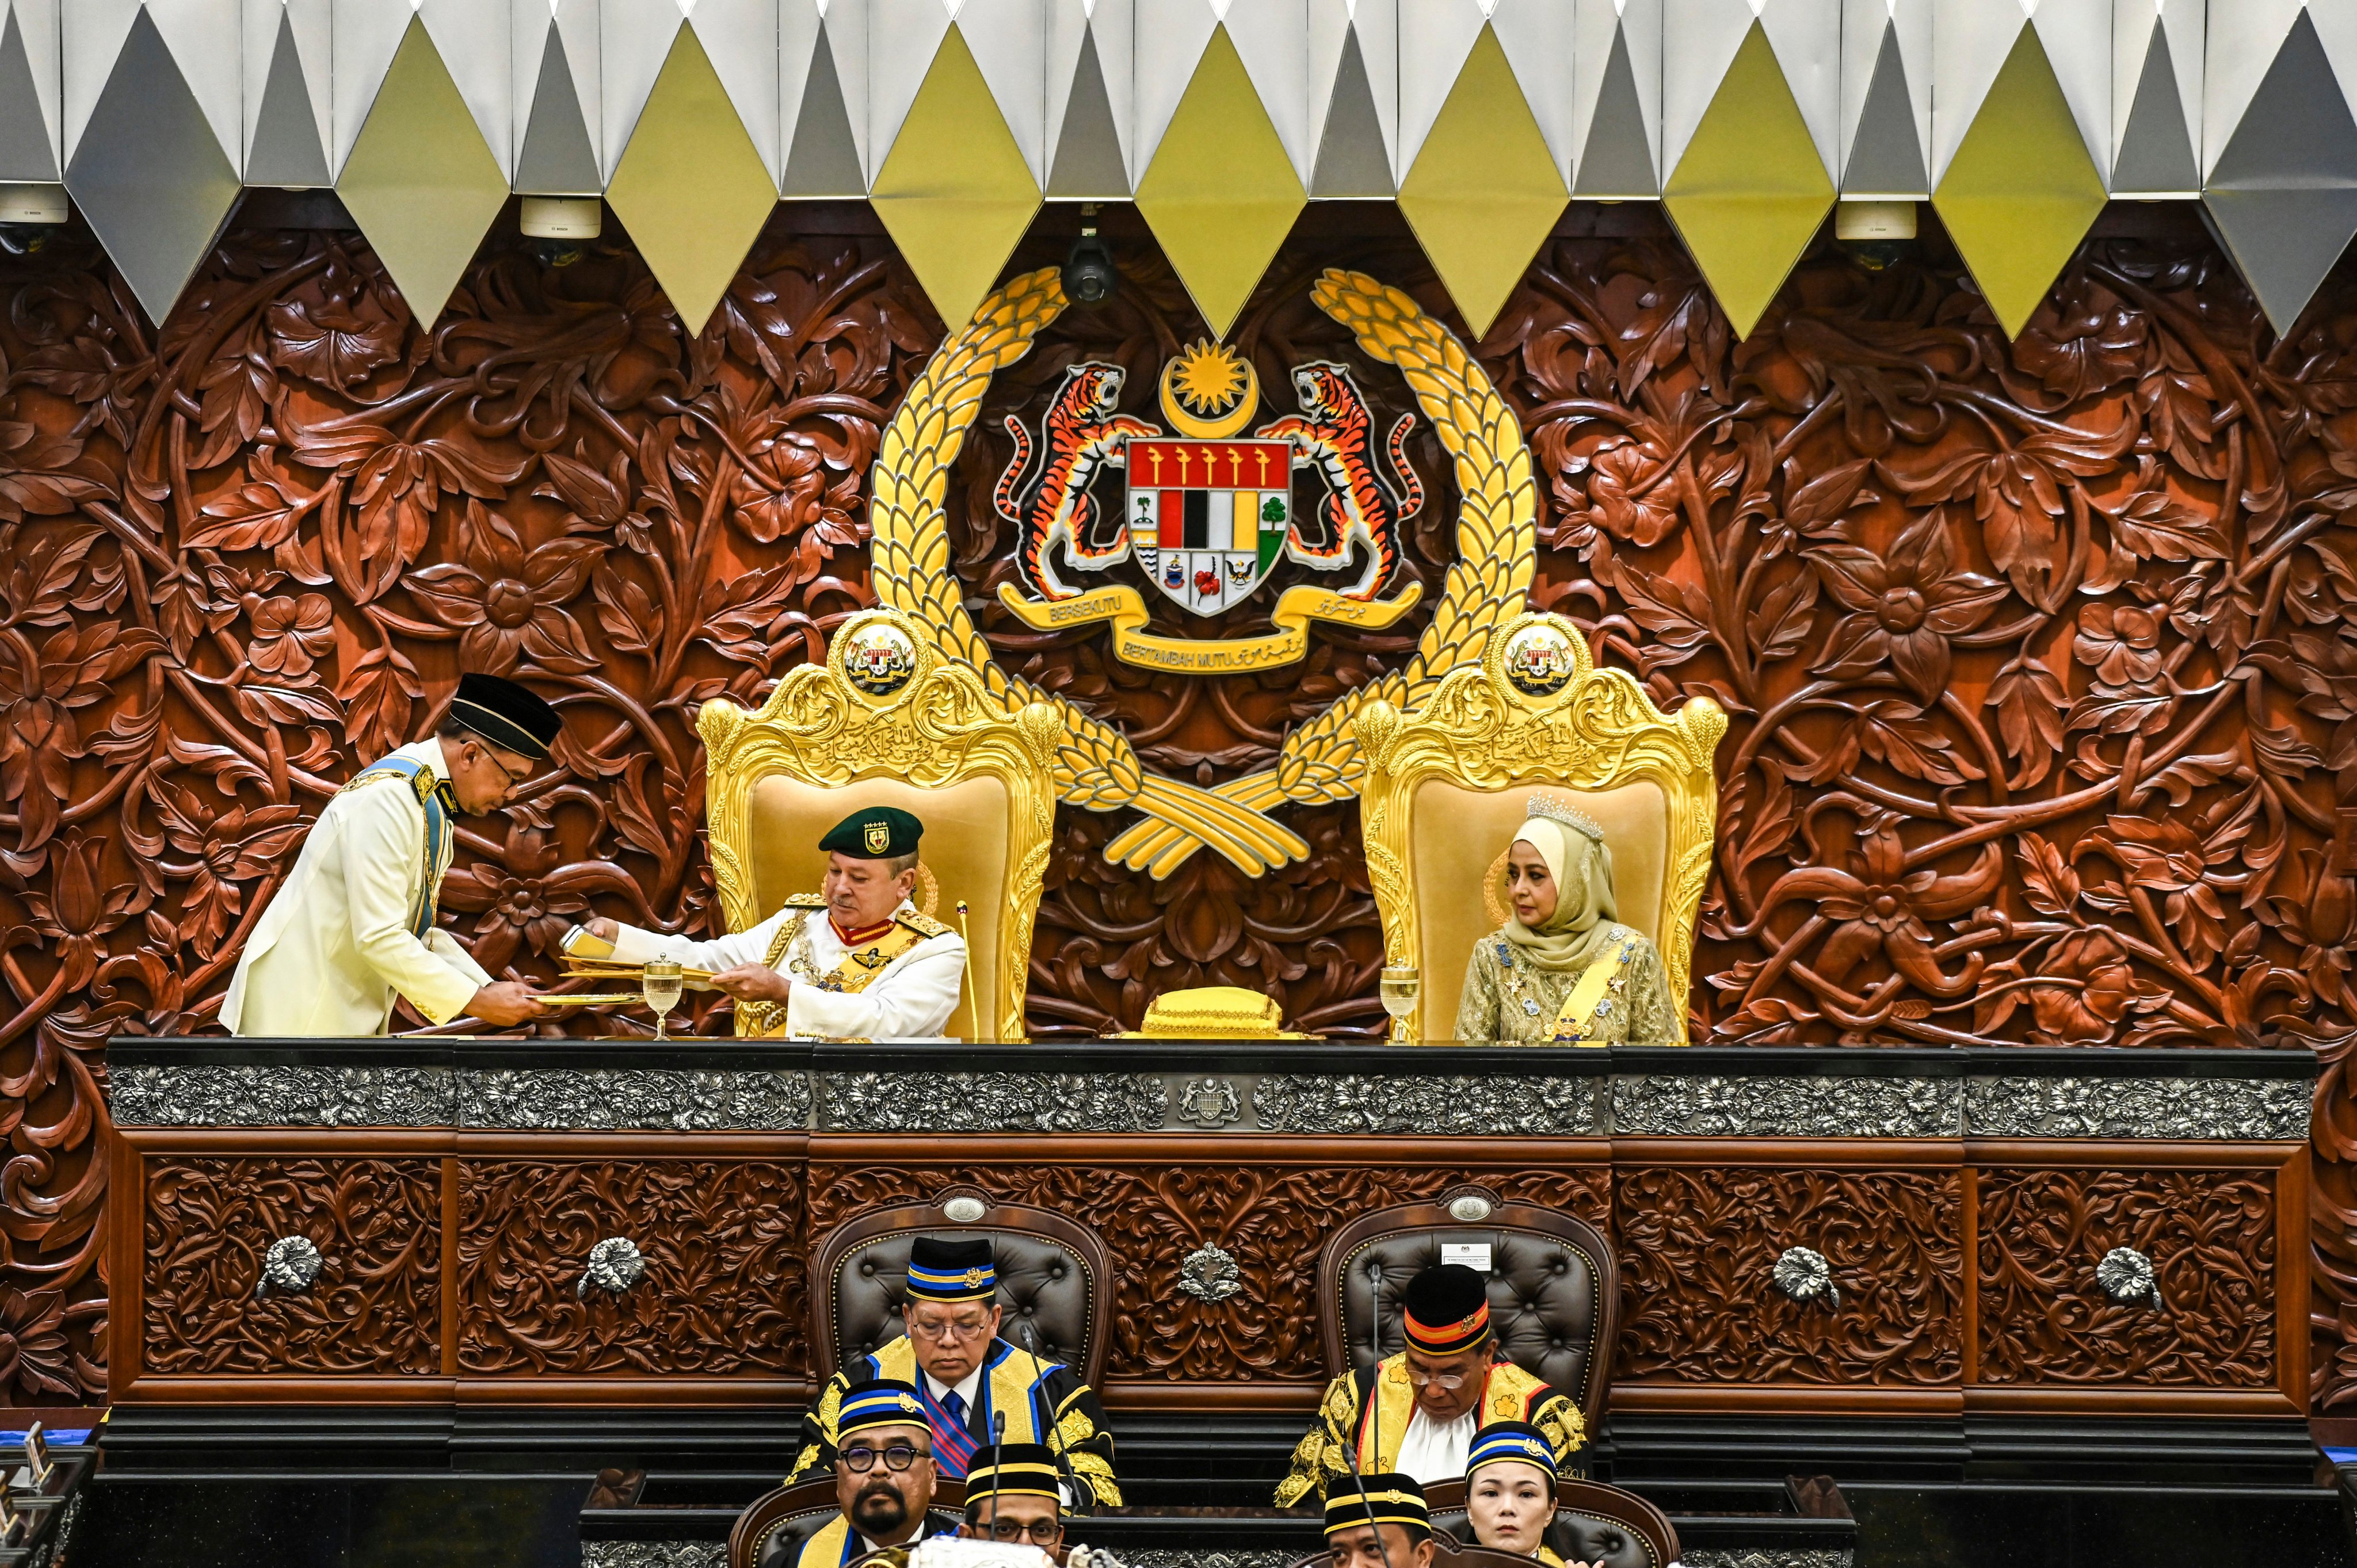 Malaysia’s king Sultan Ibrahim Iskandar receives documents from Prime Minister Anwar Ibrahim as queen Raja Zarith Sofiah looks on during the opening ceremony of the parliamentary session at parliament house in Kuala Lumpur. photo: AP